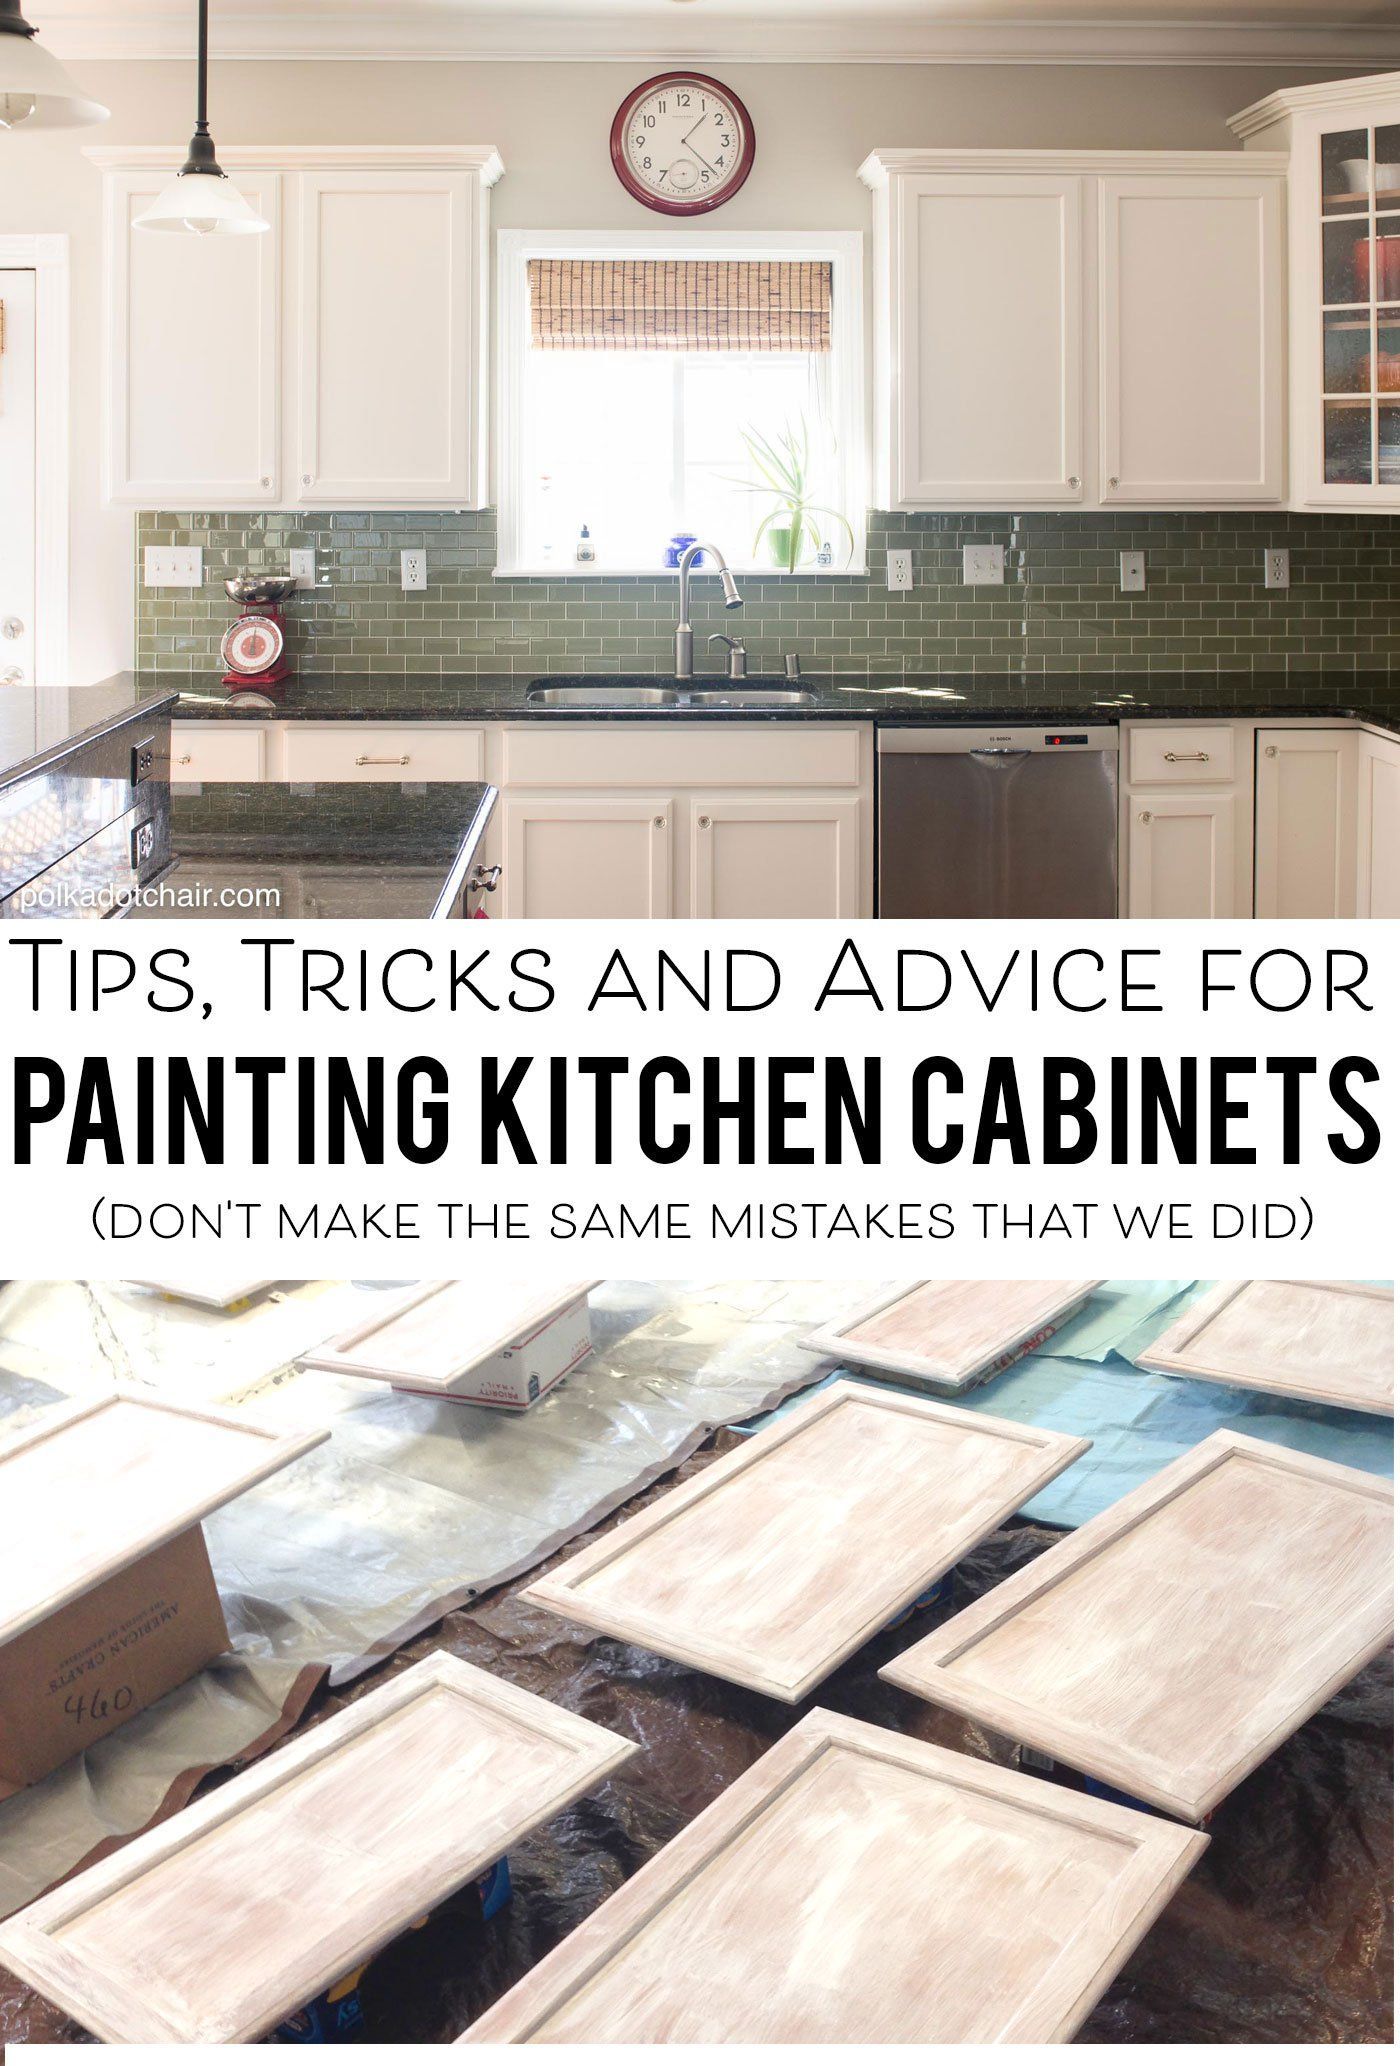 Tips and Tricks for Painting Kitchen Cabinets - Polka Dot Chair -   19 diy Kitchen tips ideas